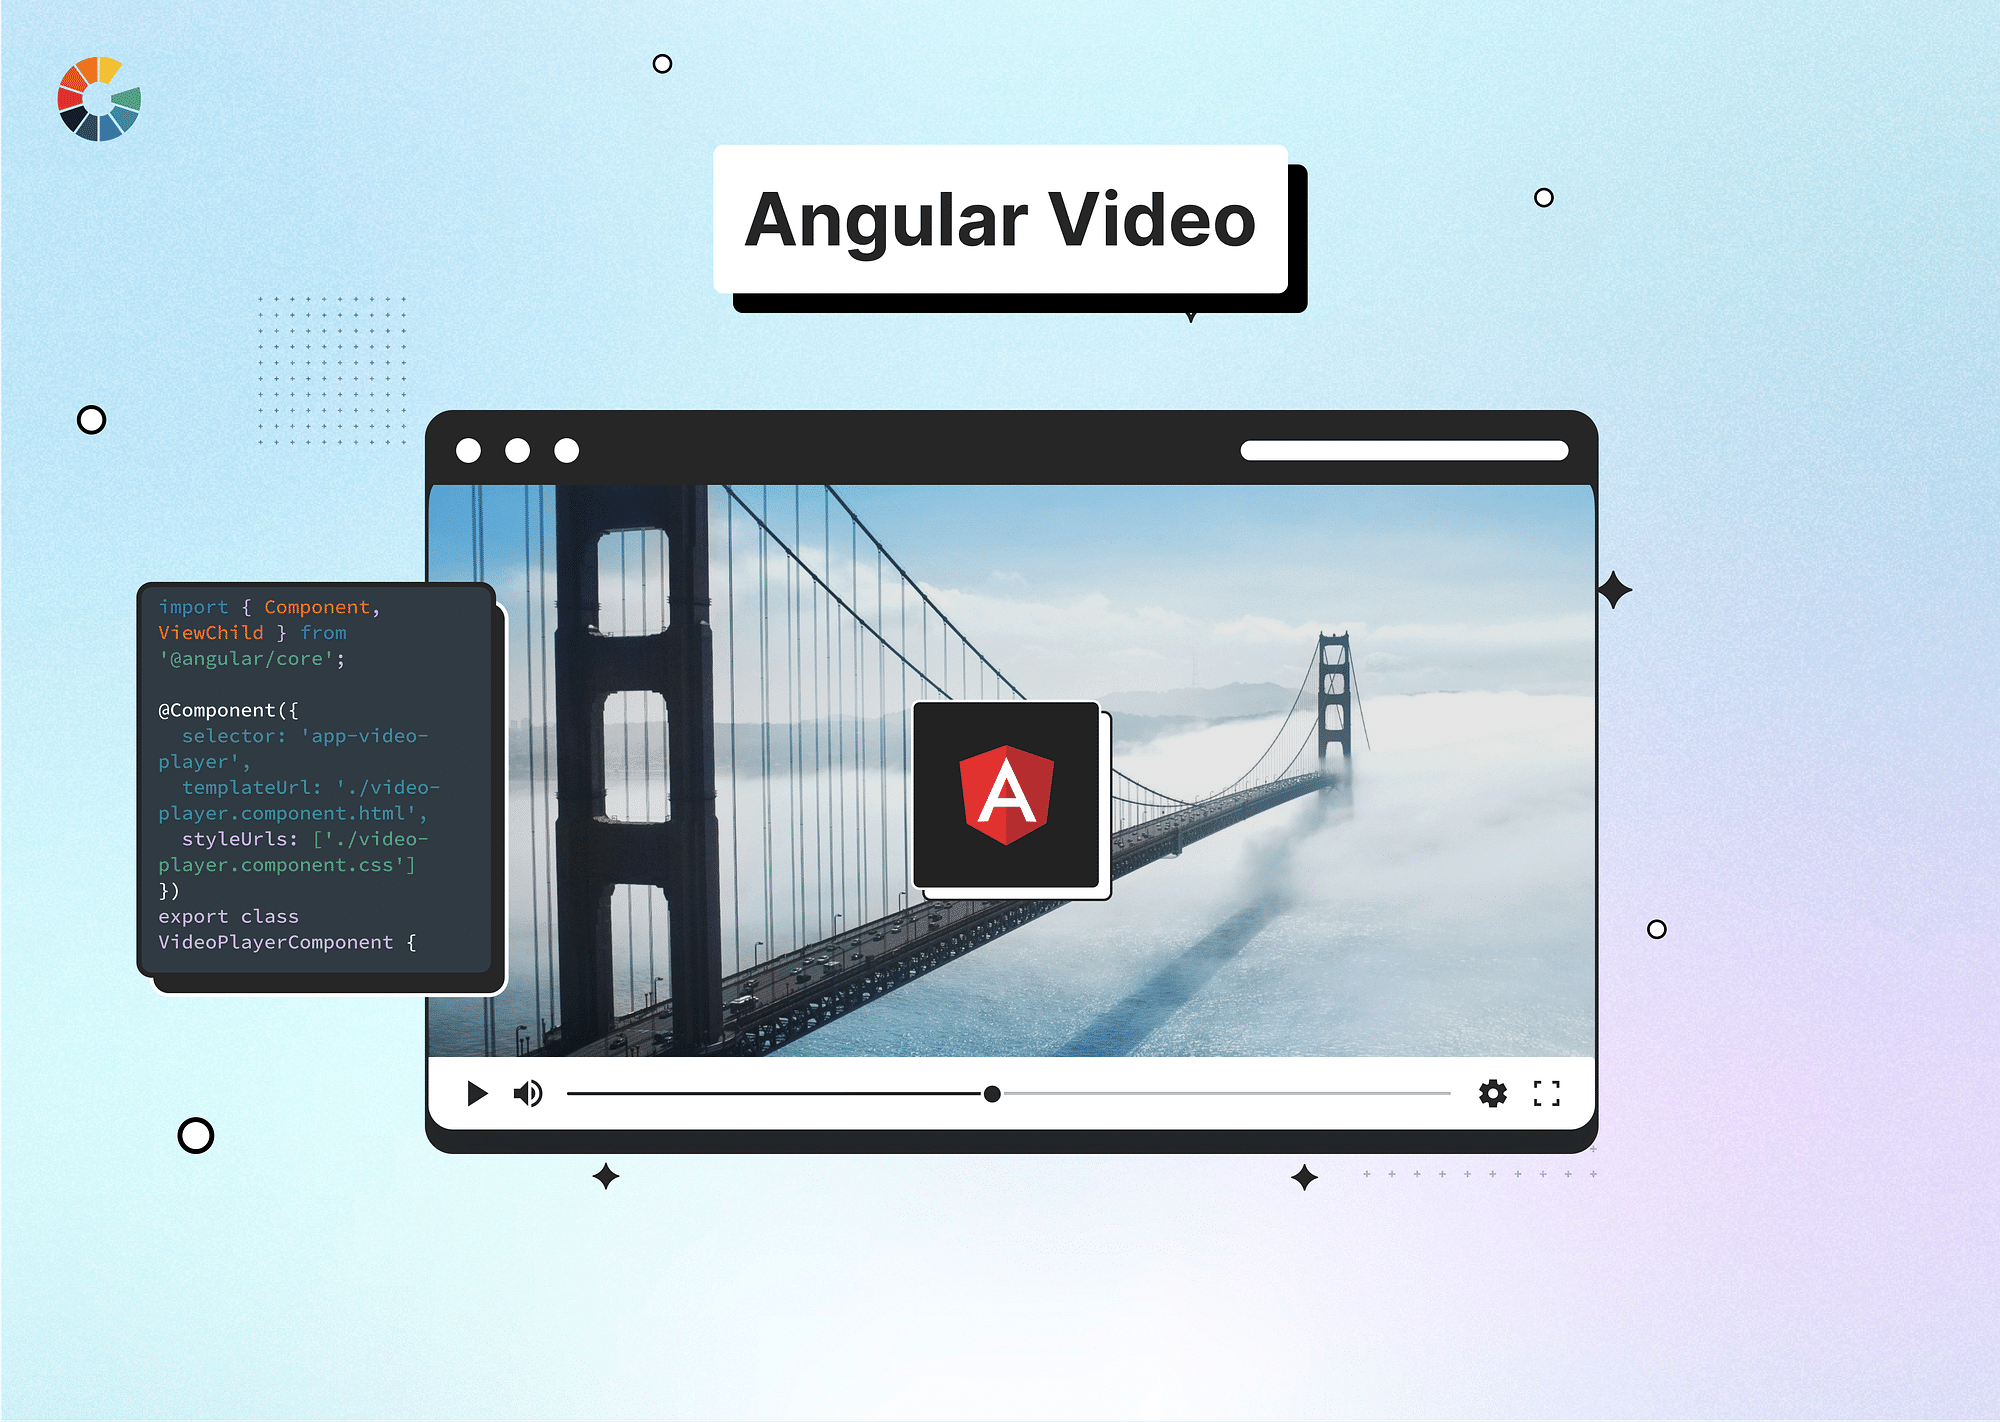 How to Implement a Video Player in Angular?